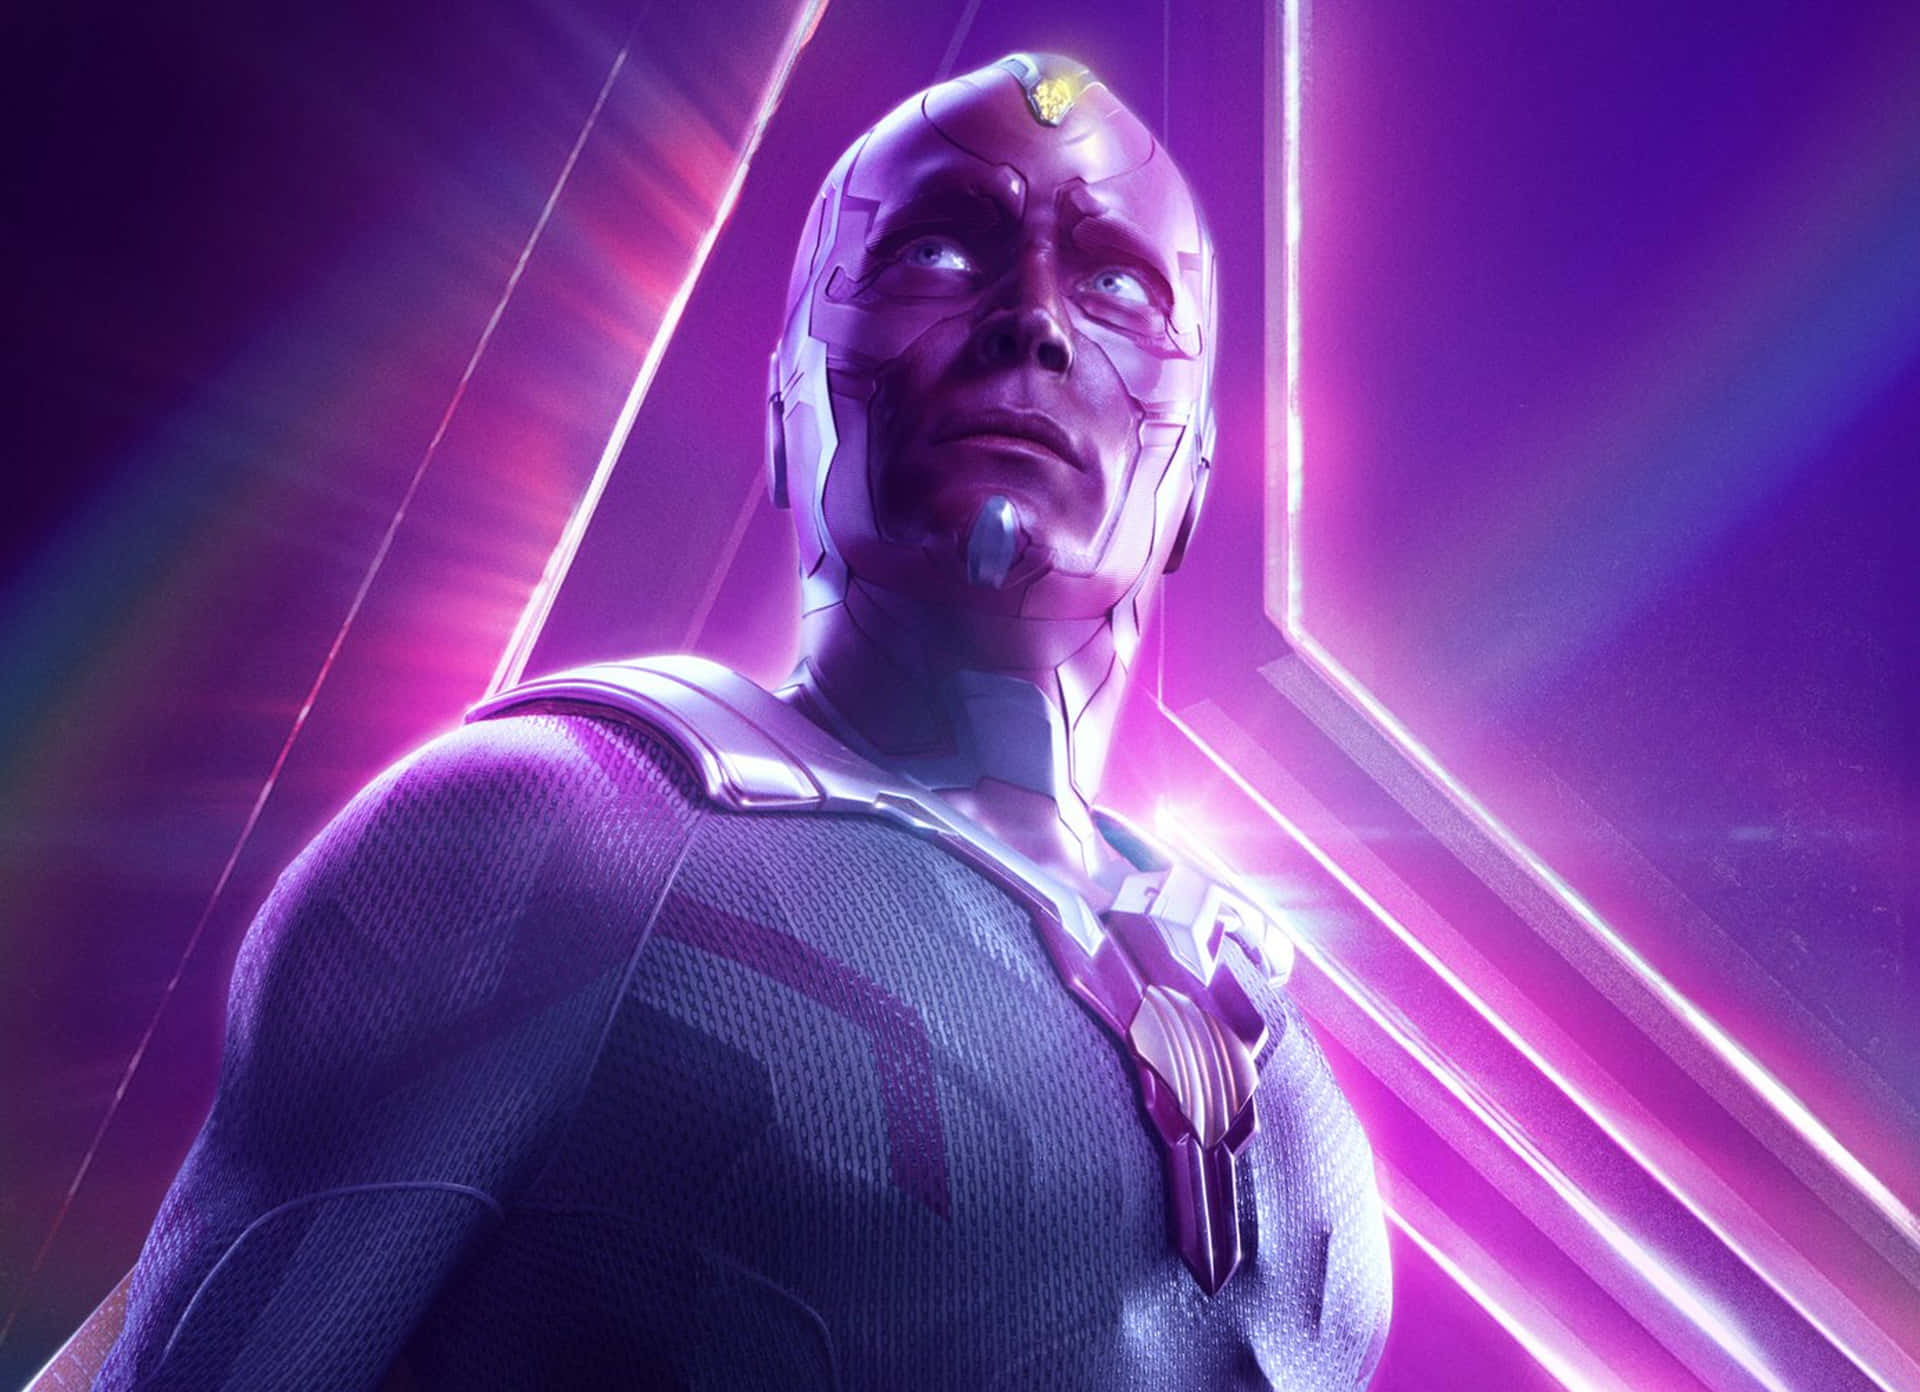 Uniting two generations of superheroes, Vision joins the Avengers! Wallpaper